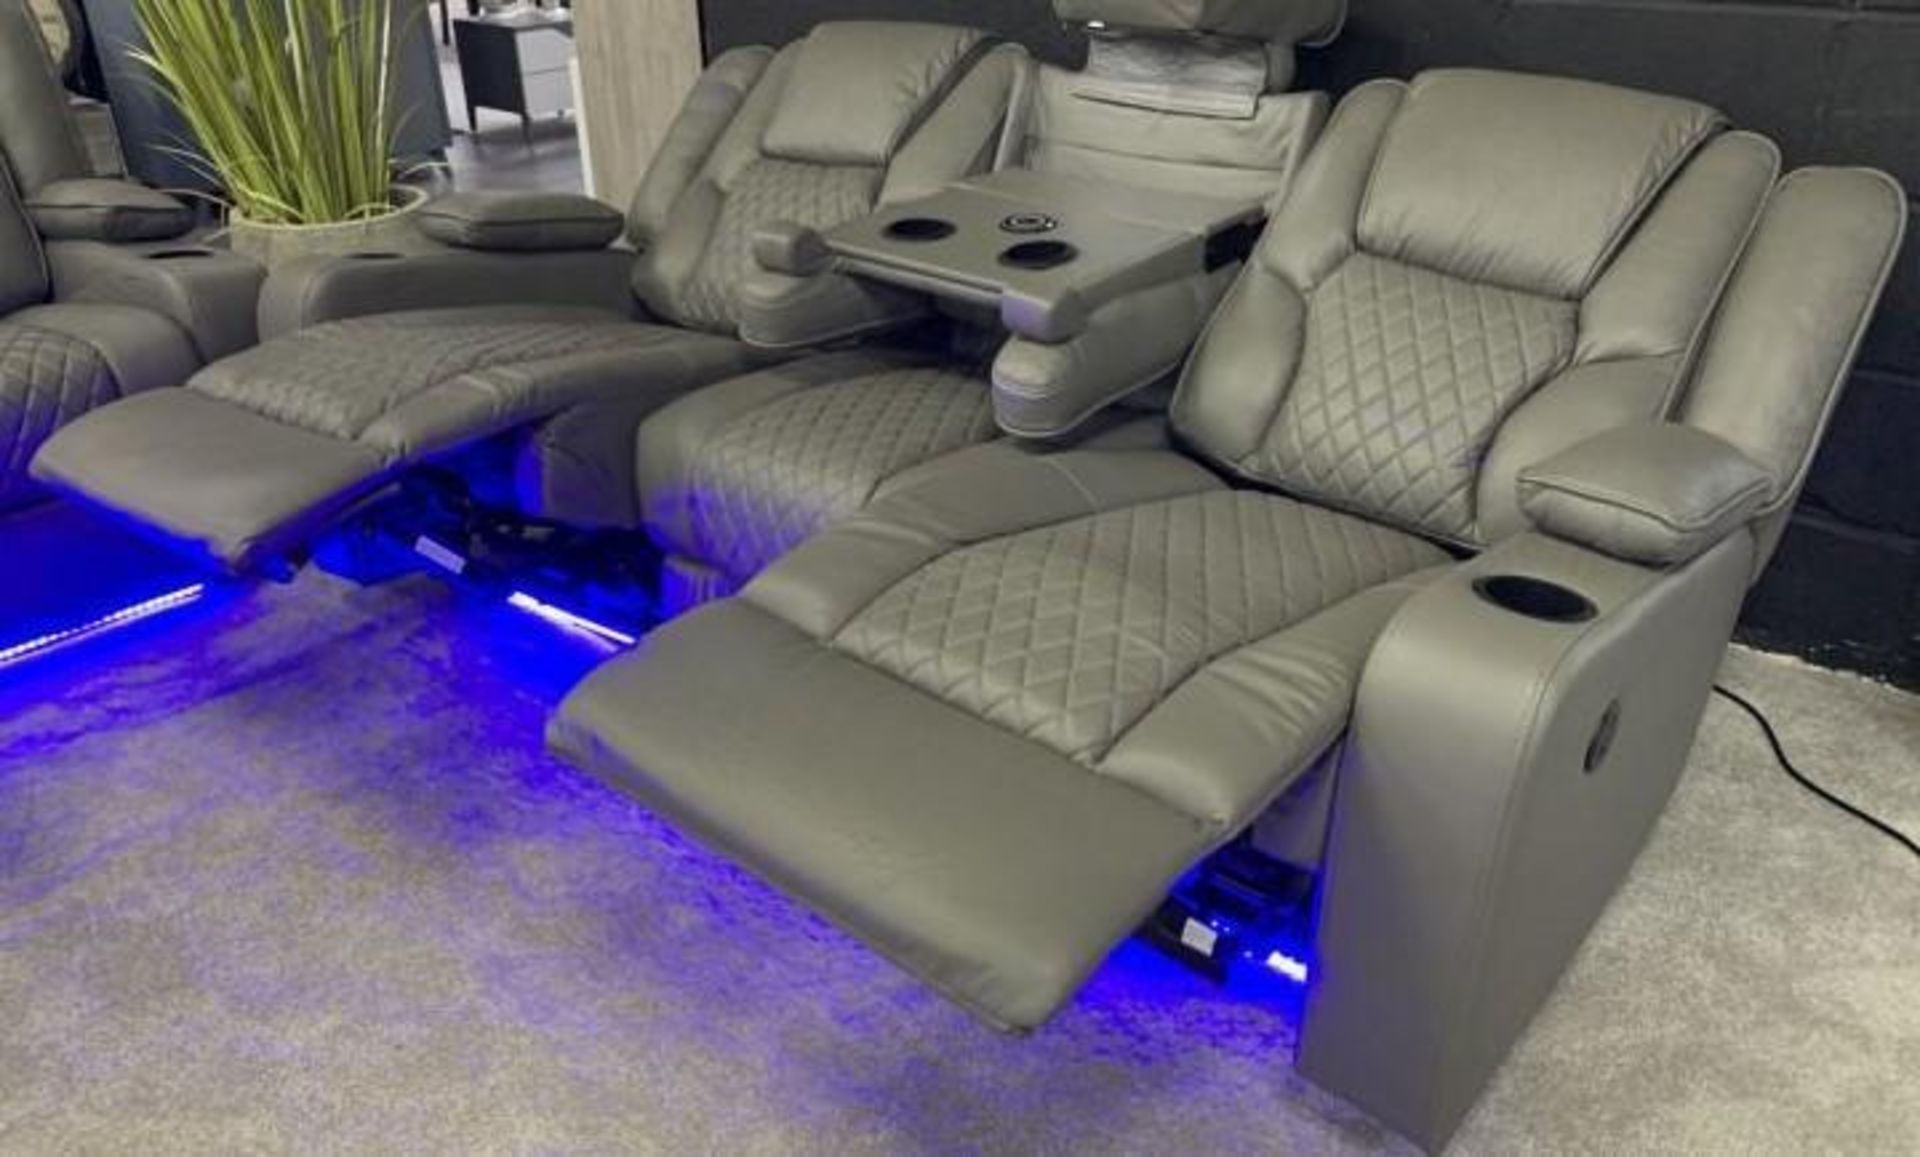 BRAND NEW Bentley Grey Leather 3 Seater Electric Recliner With Wireless Charging and Floor lights!